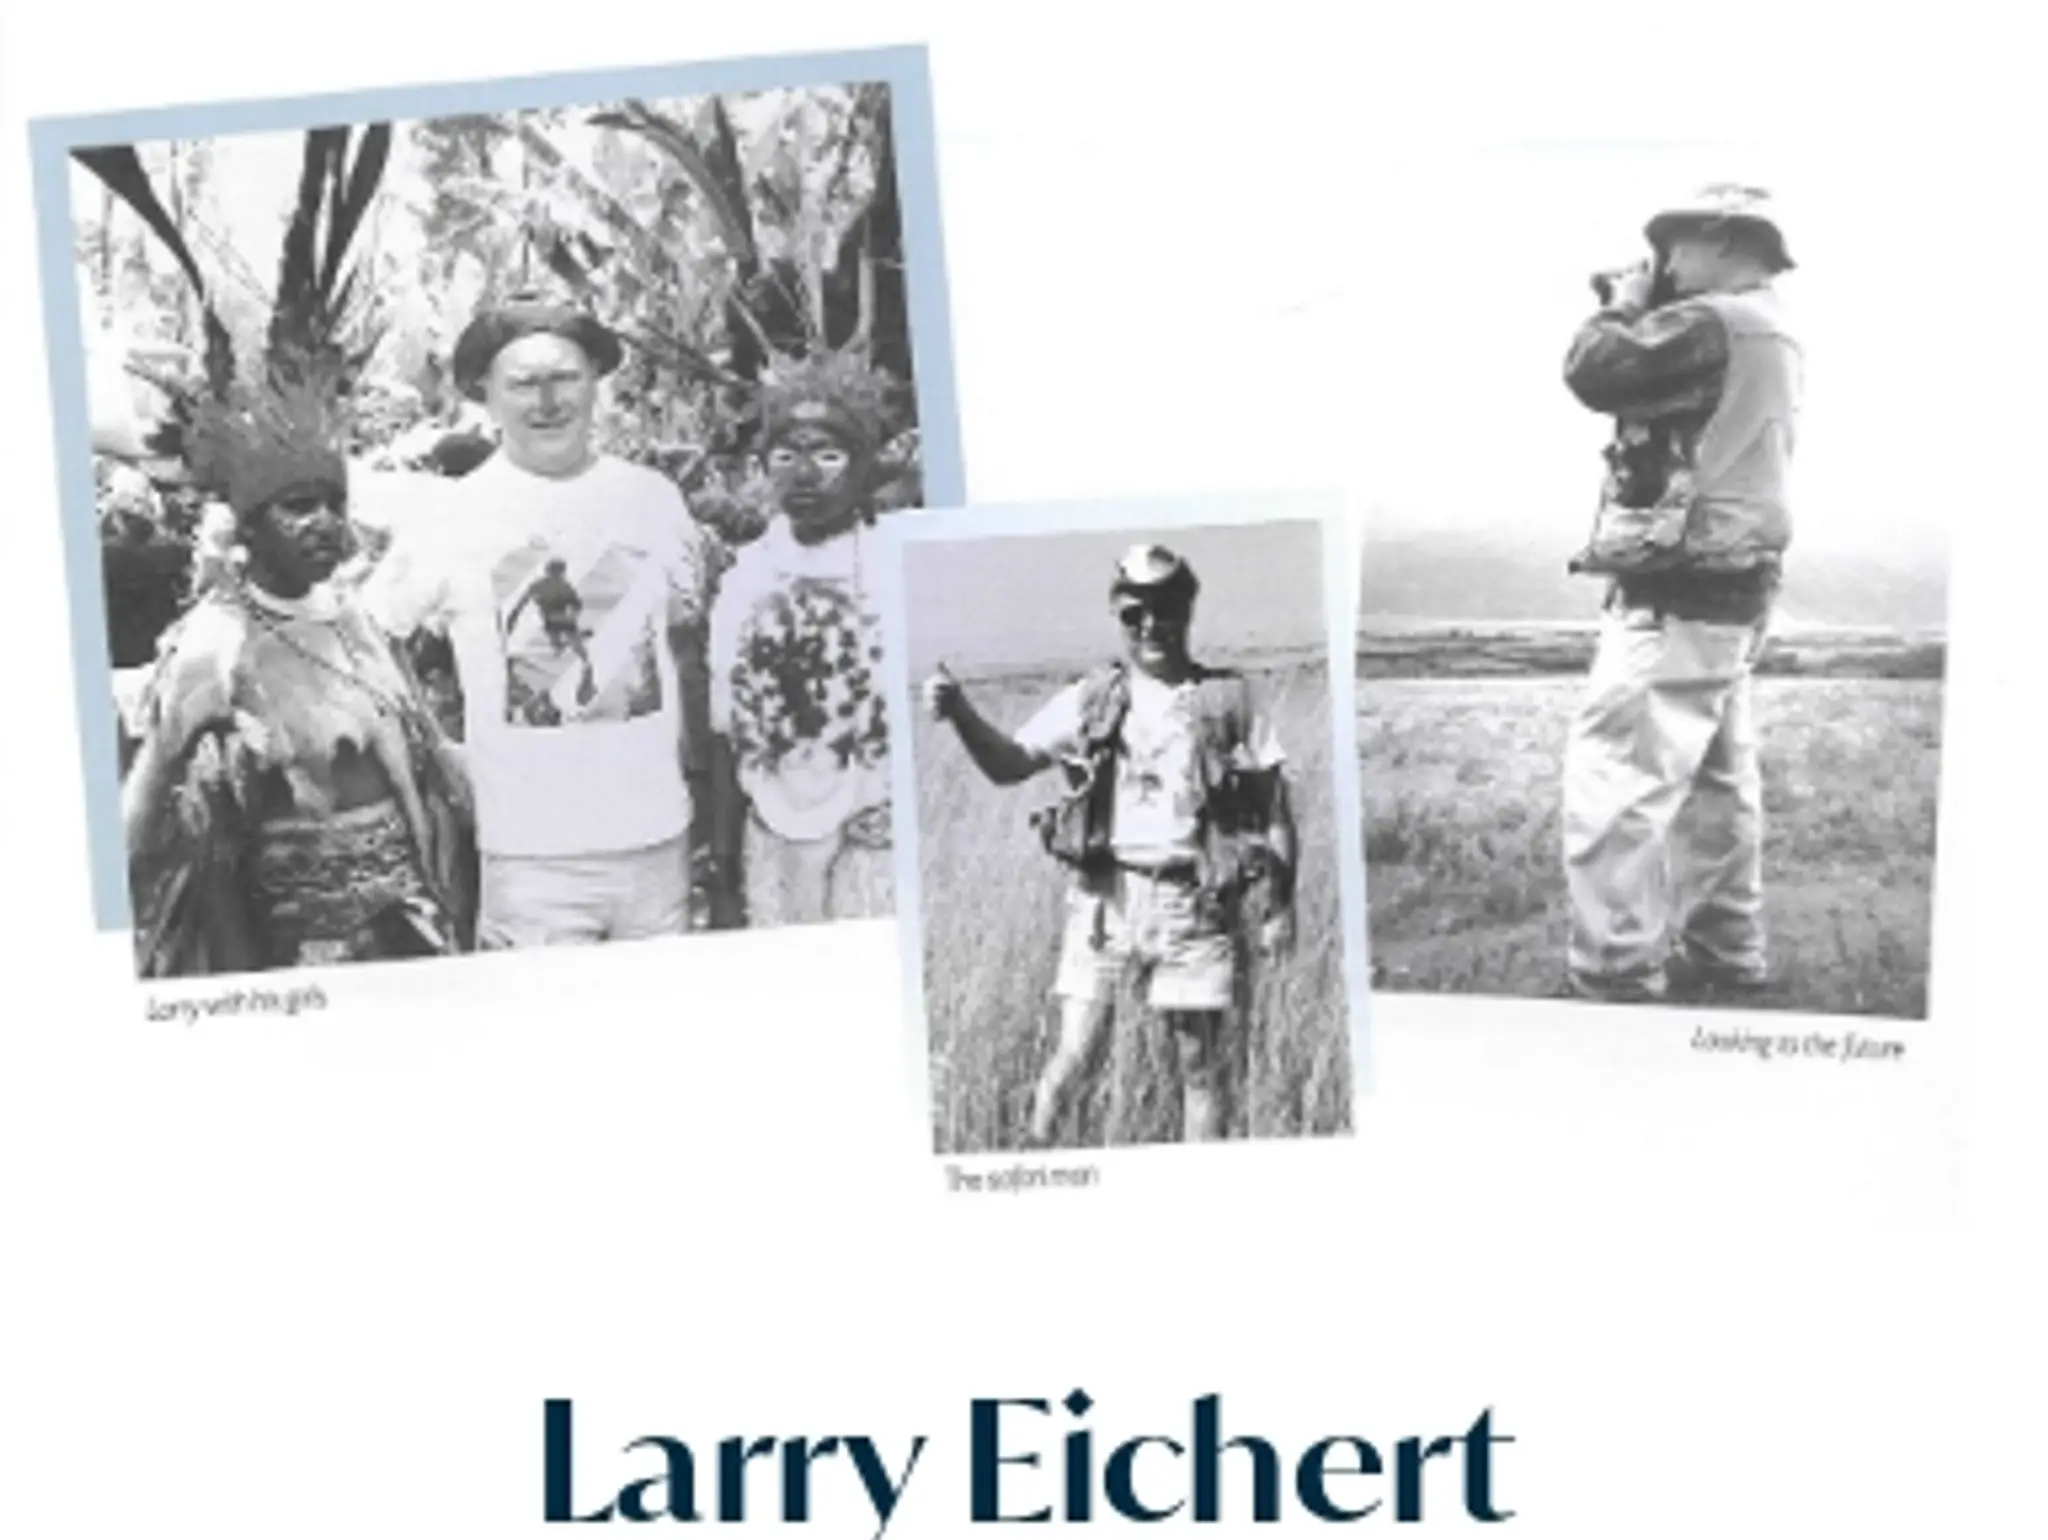 A Tribute to Larry Eichert